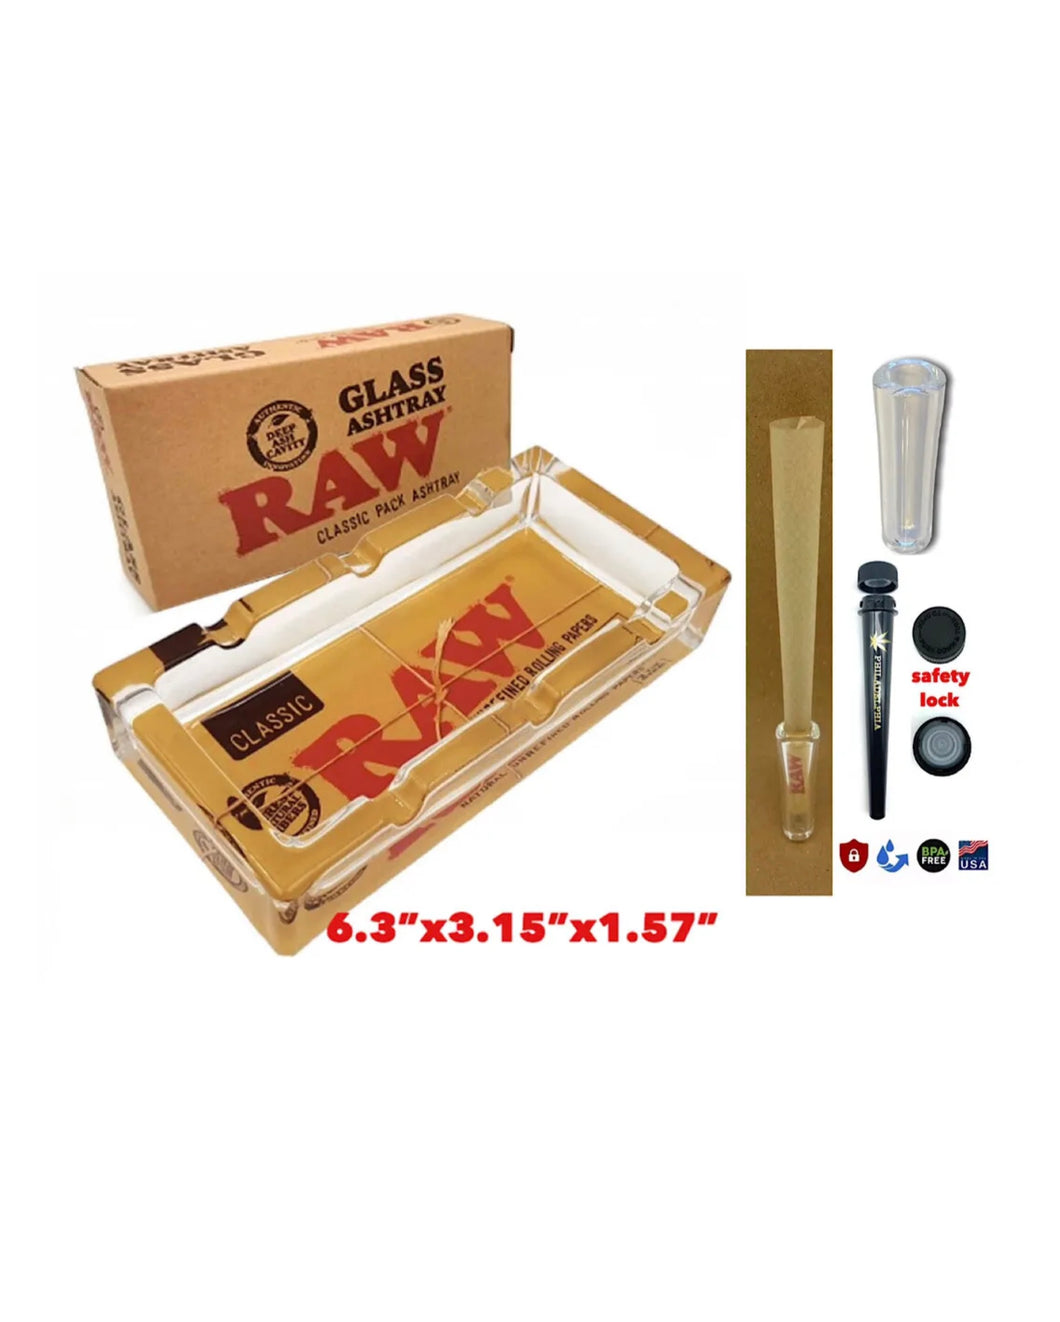 RAW Classic Pack Glass Ashtray 6.3x3.1x1.57 + safety lock tube+glass cone tip